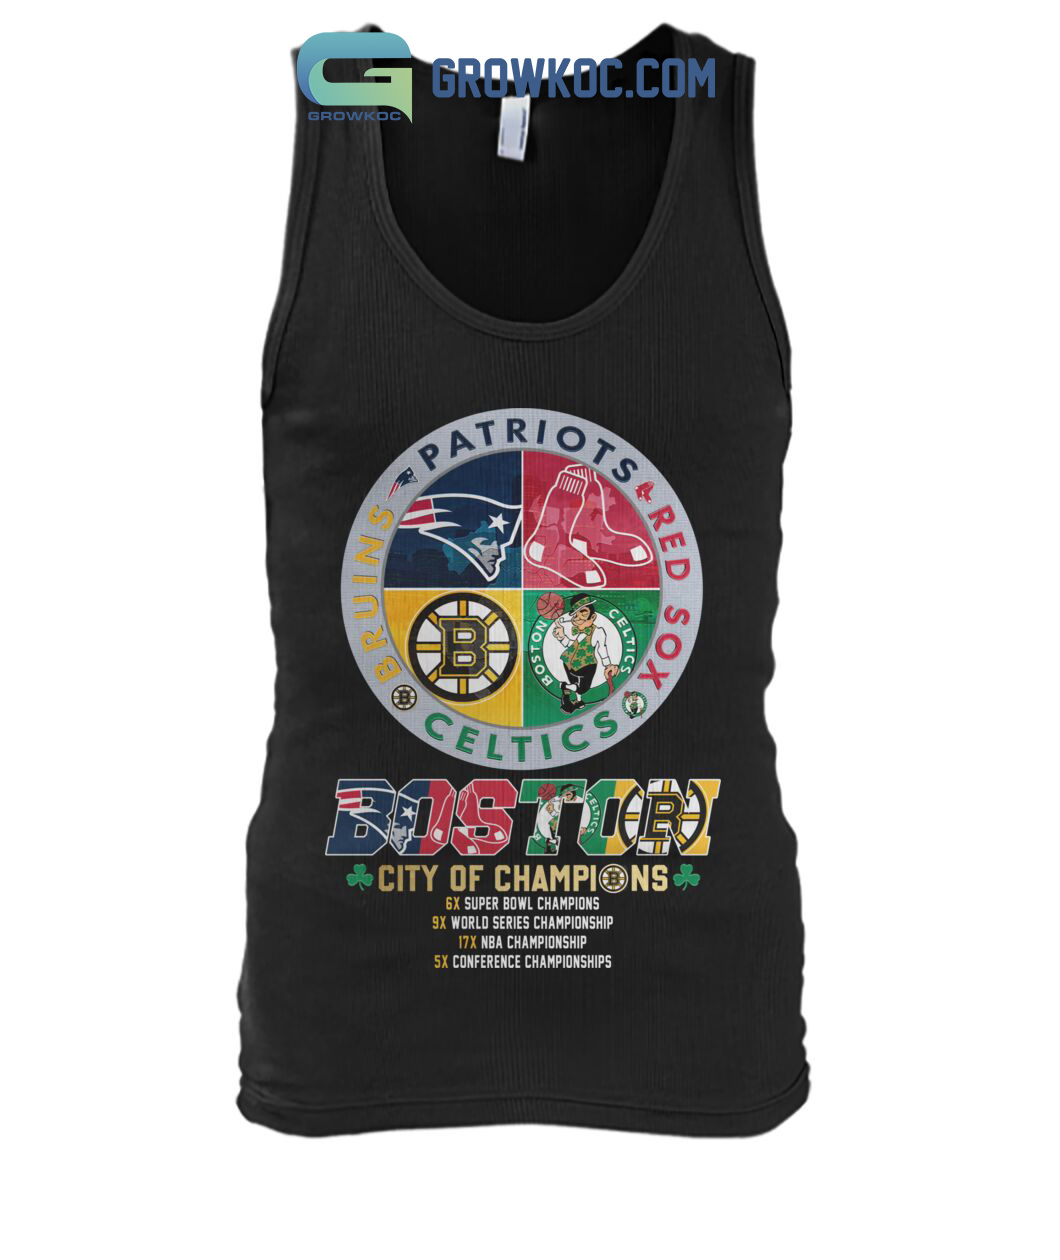 Boston City Of Champions Patriot Red Sox Celtics And Bruins T